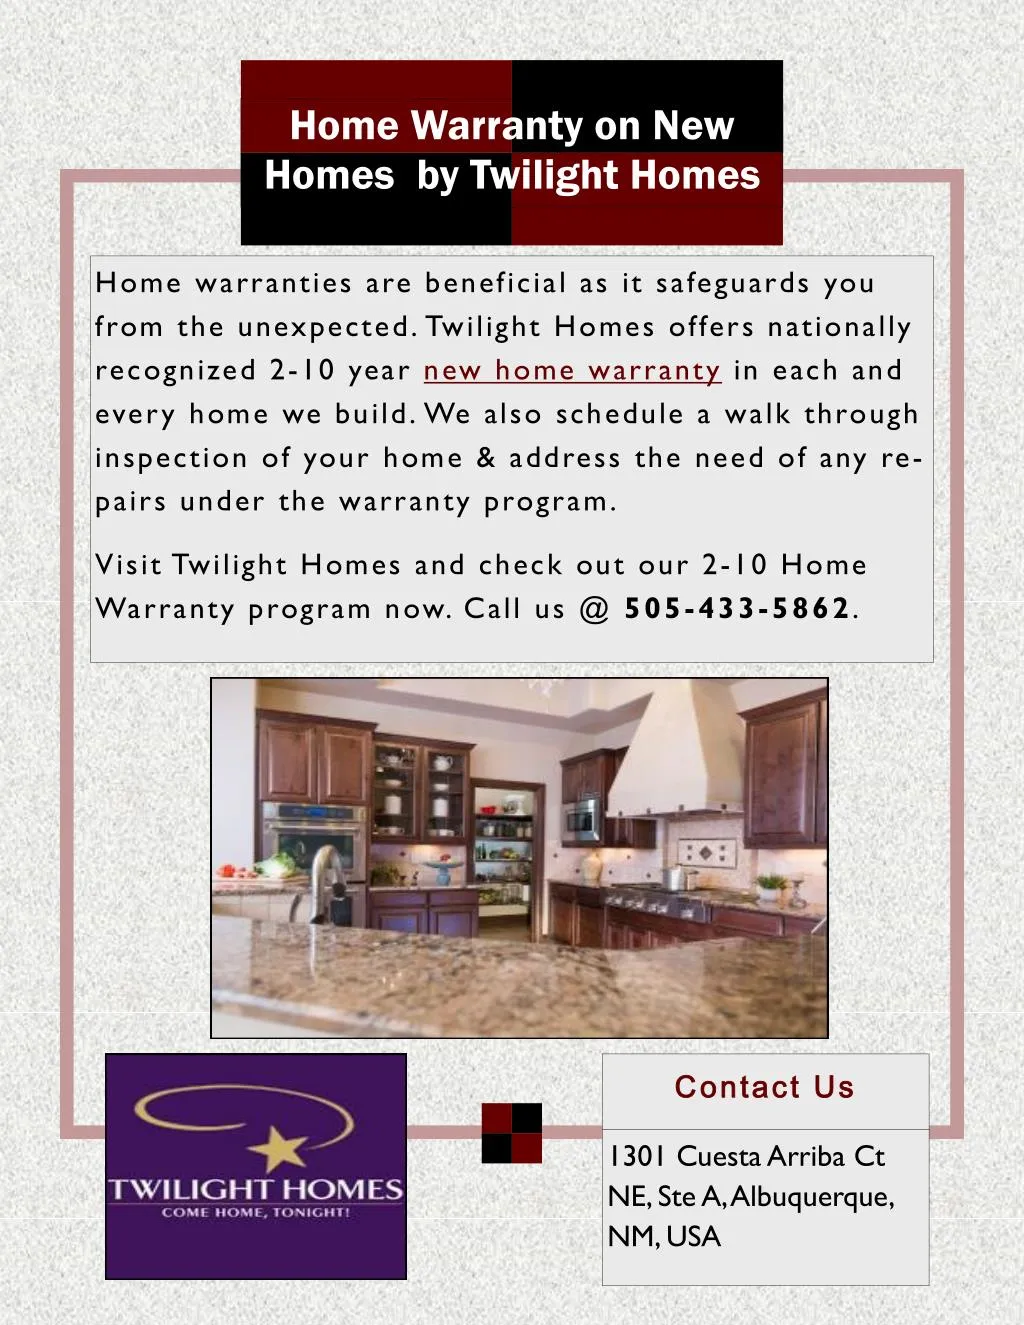 home warranty on new homes by twilight homes